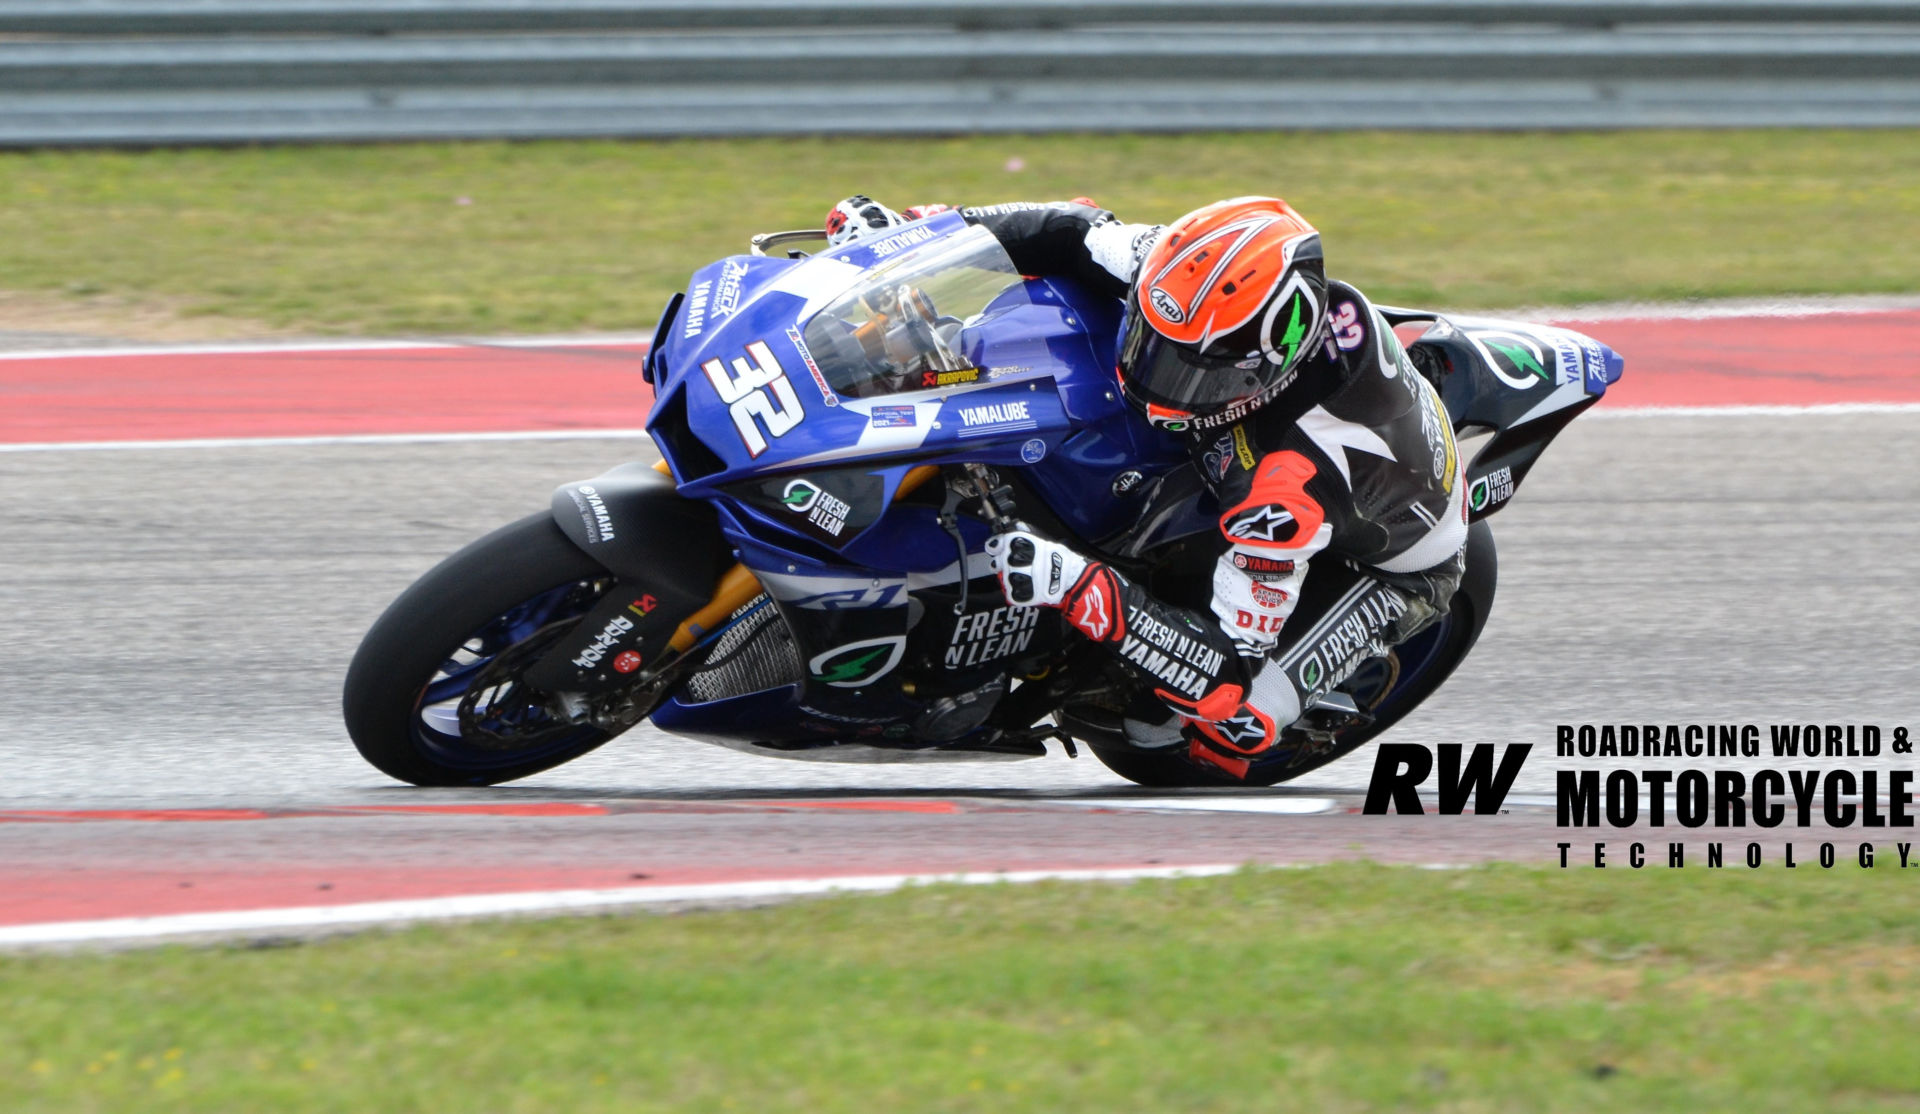 Jake Gagne (32) at speed Wednesday at the MotoAmerica test at COTA. Photo by David Swarts.